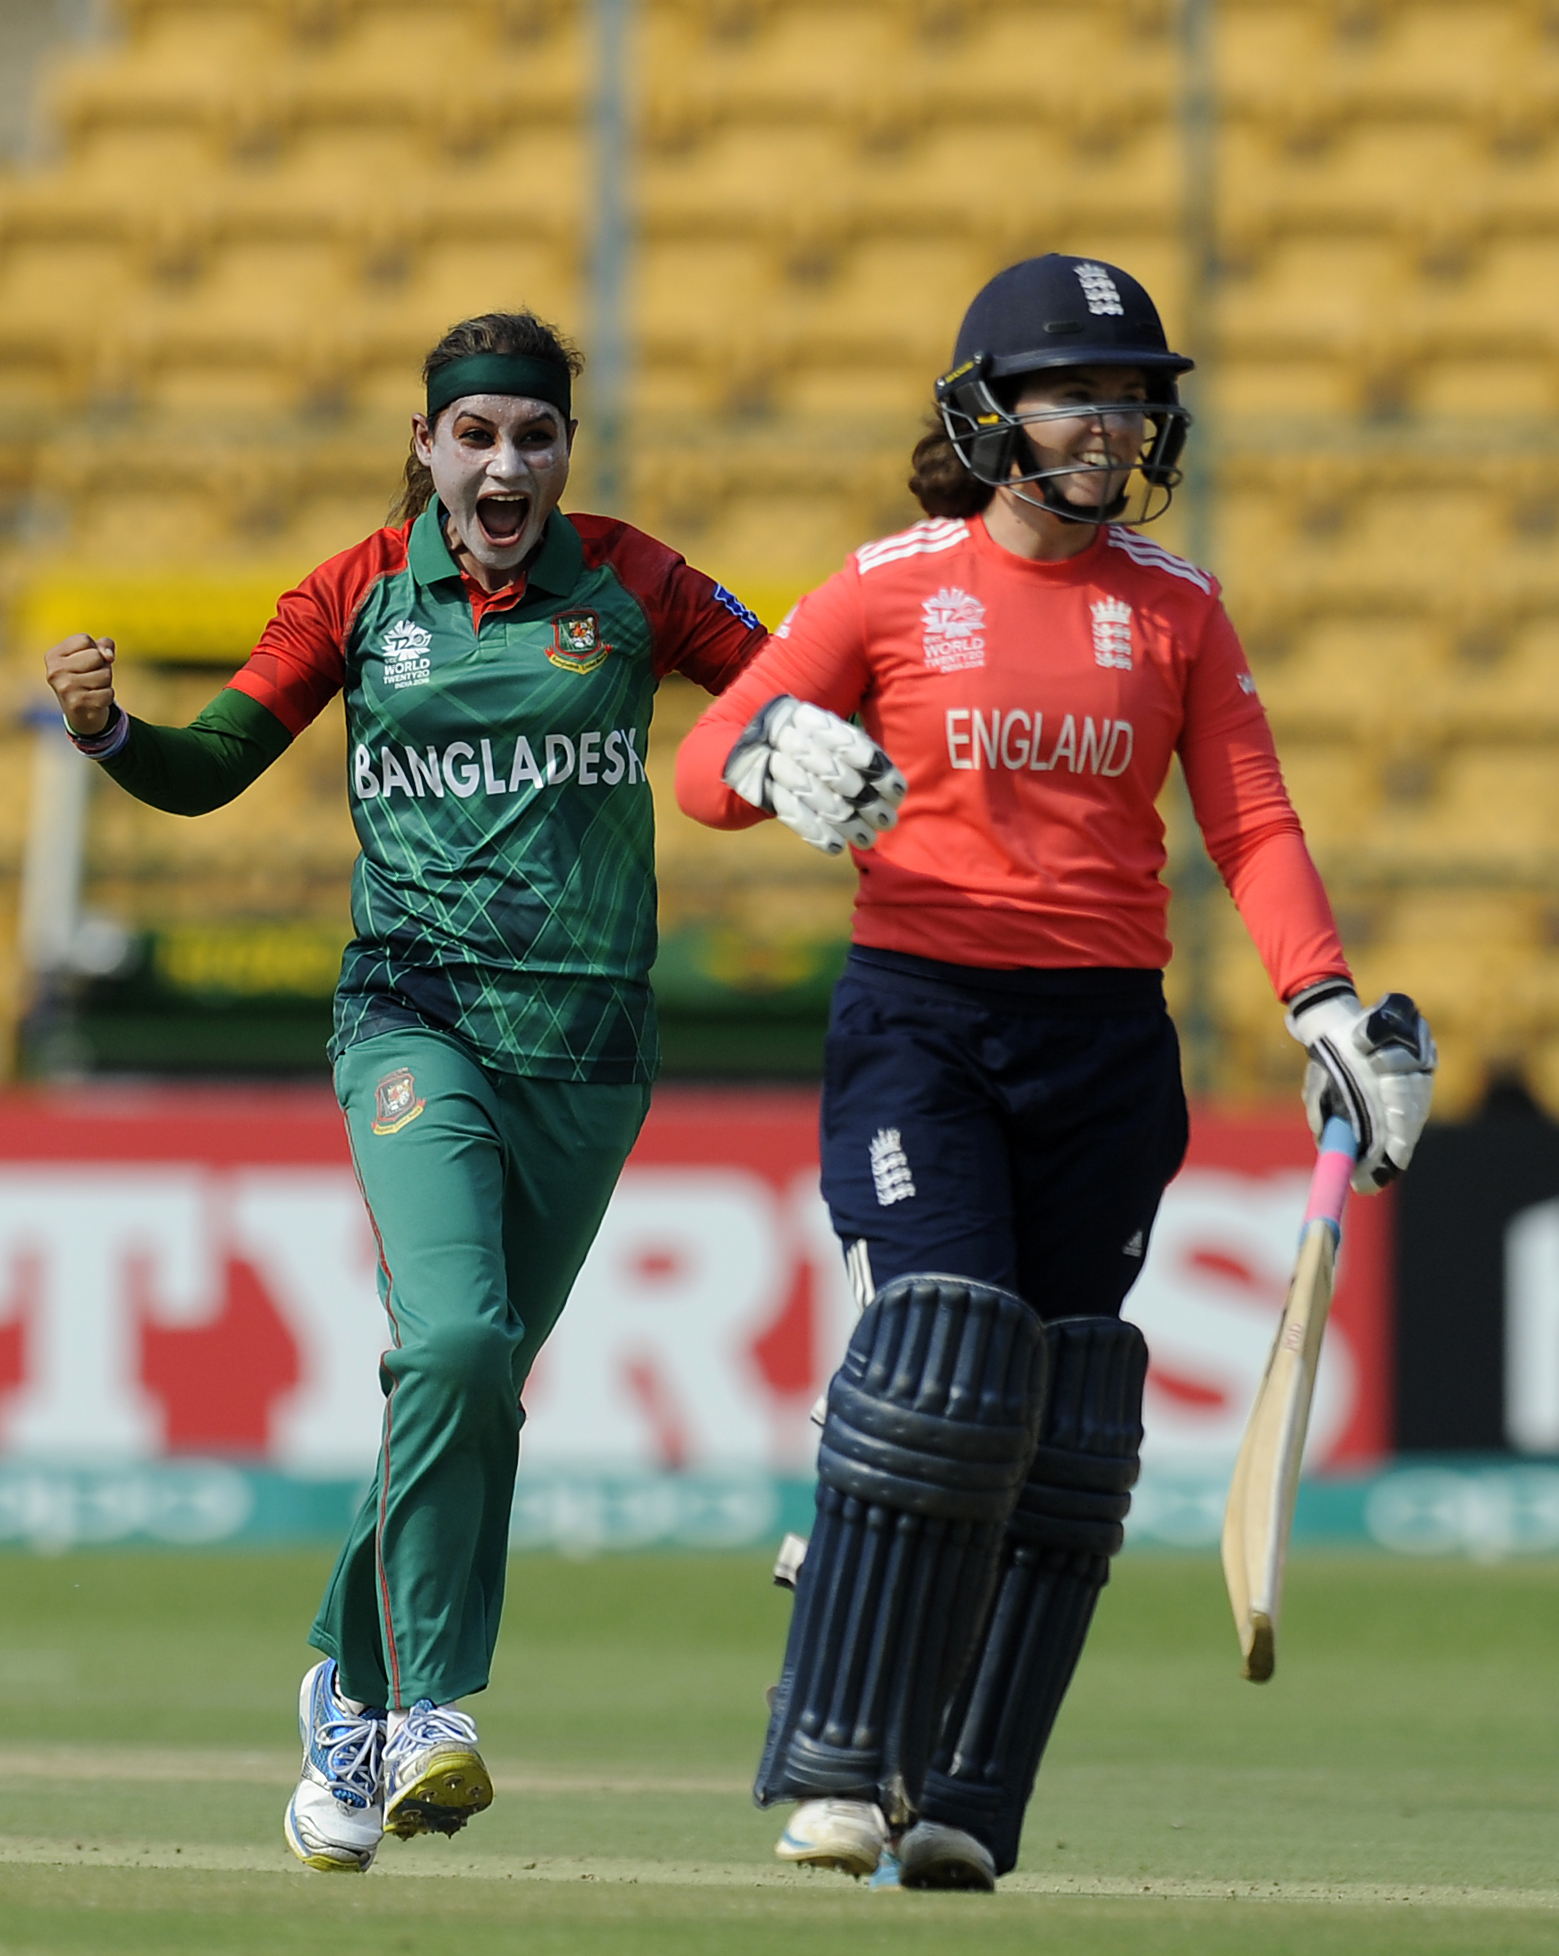 Jahanara Alam celebrates after getting Tammy Beaumont of England bowled out. Photo via ICC, Photo credit: Pal Pillai/IDI via Getty Images